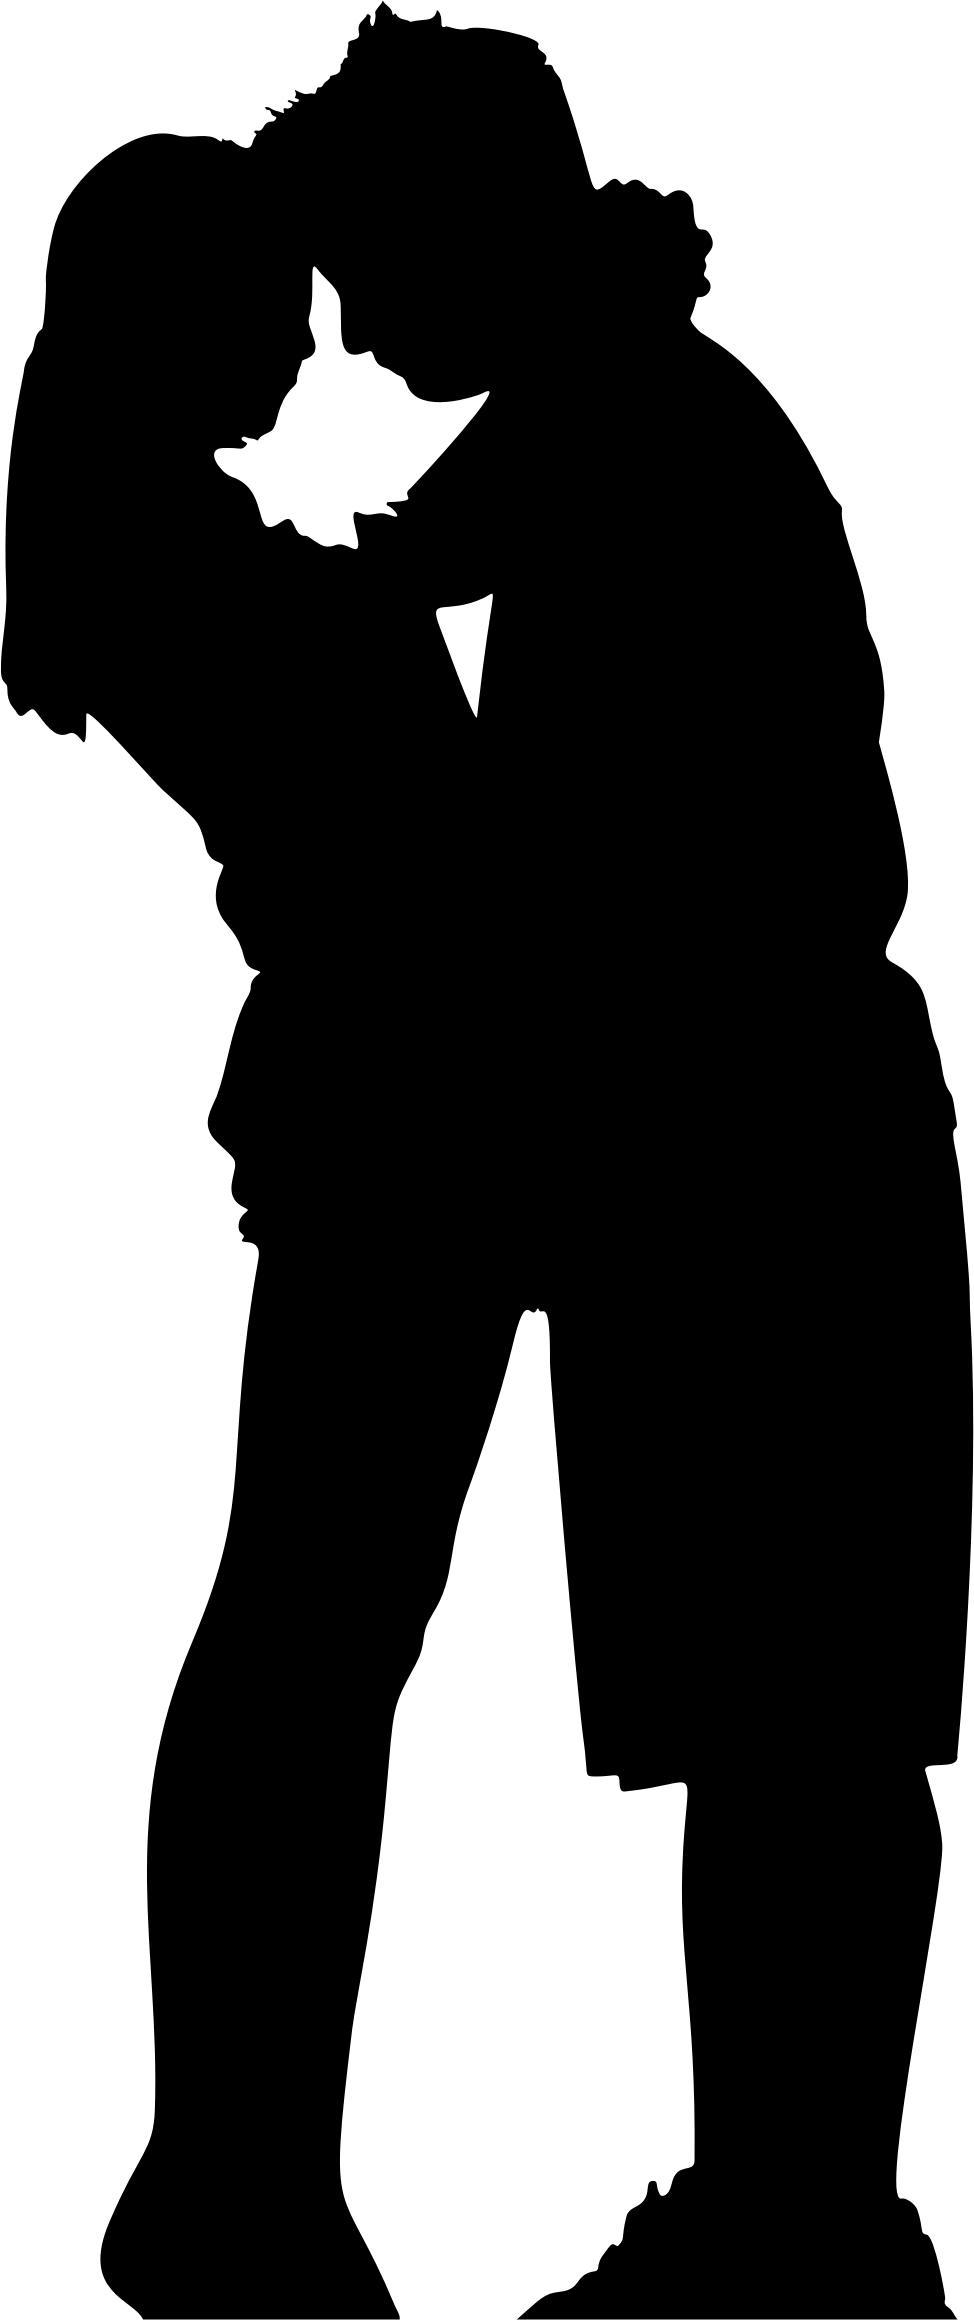 Young Couple Hugging Silhouette png transparent